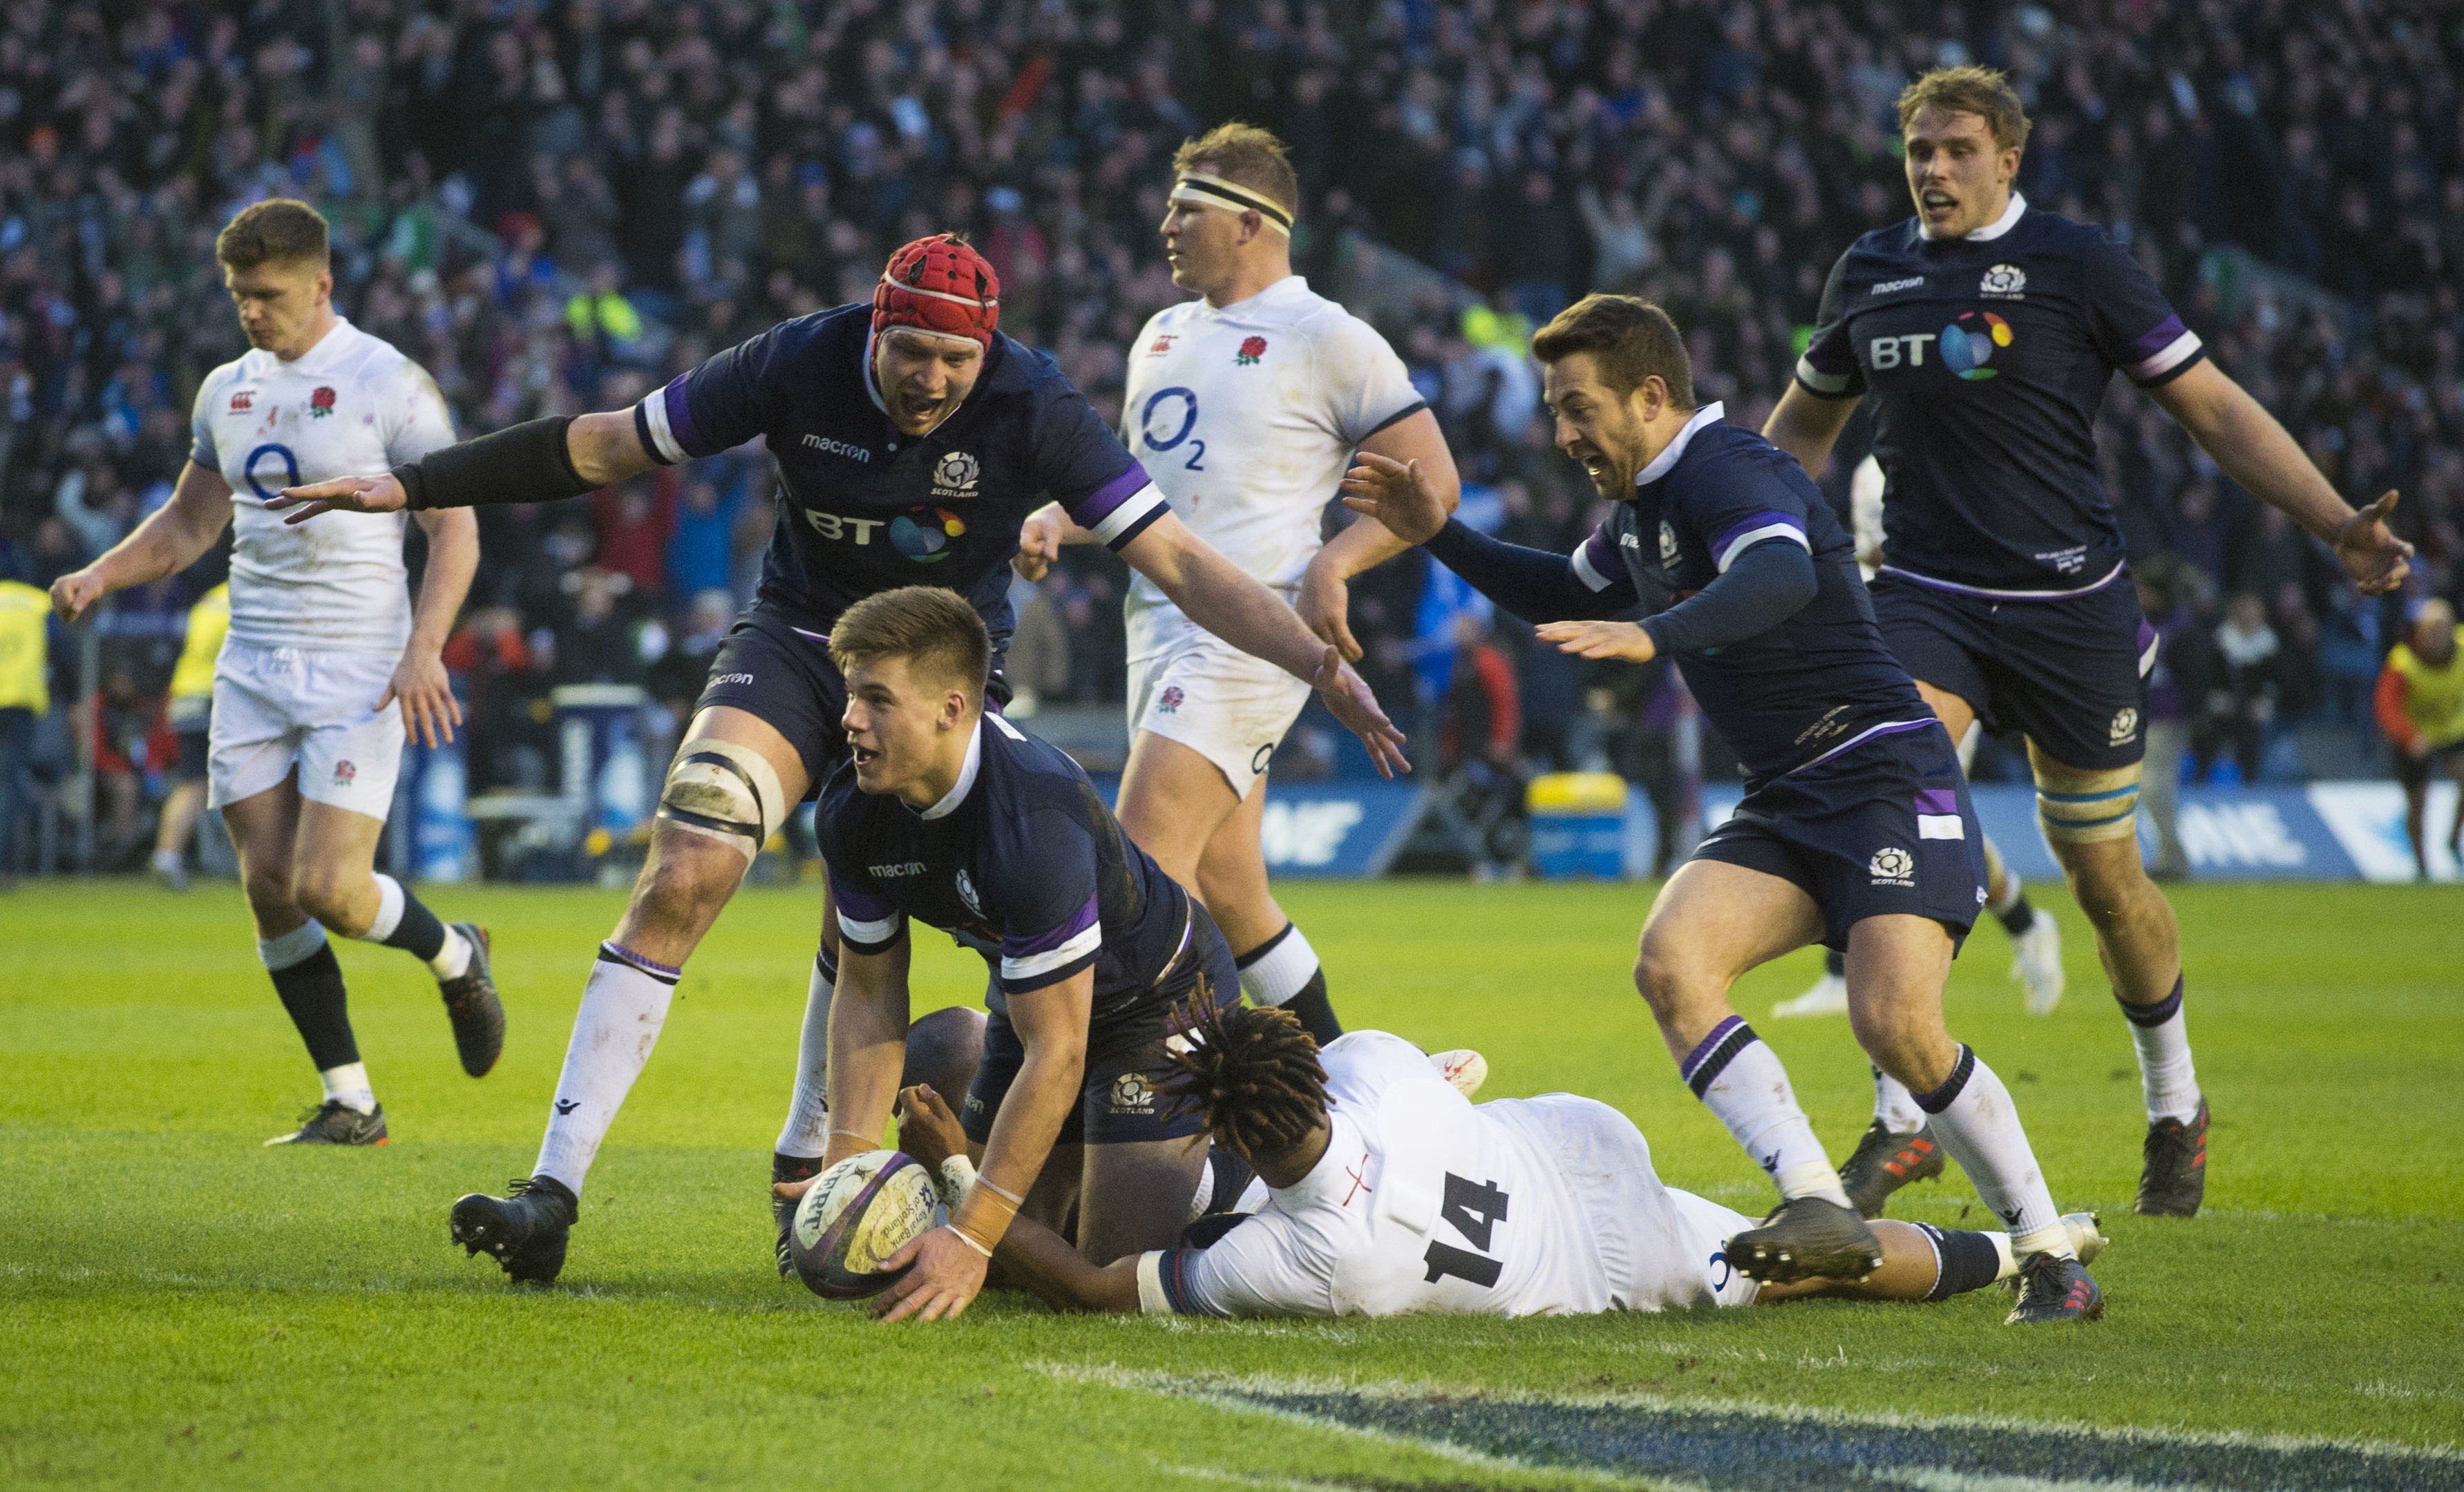 Scotland's men become fifth best rugby team in the world following